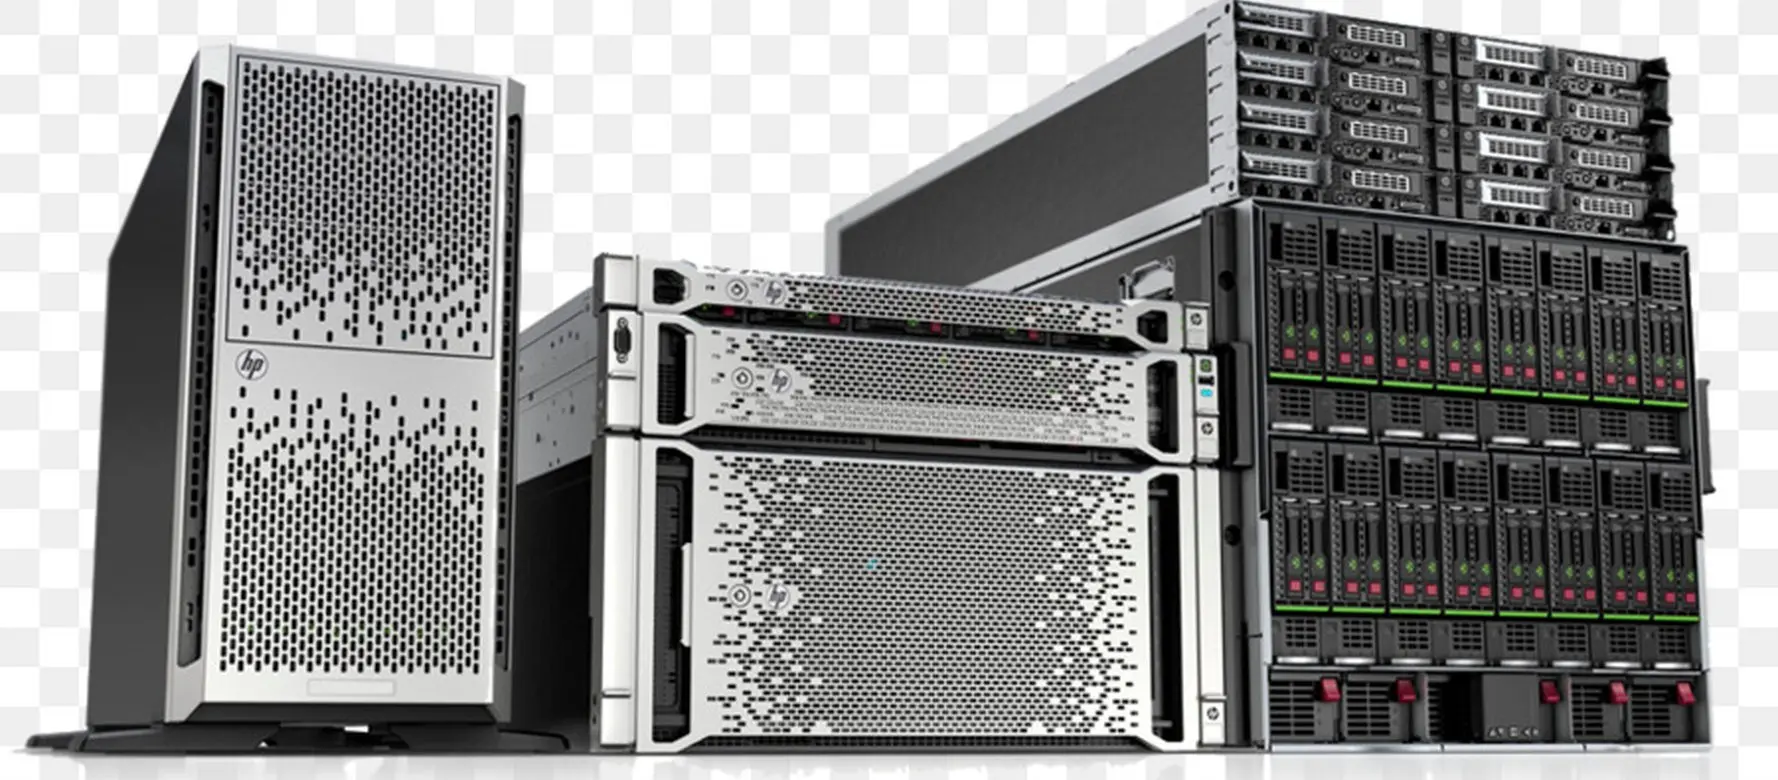 pros of hewlett packard servers - What are the benefits of HP servers